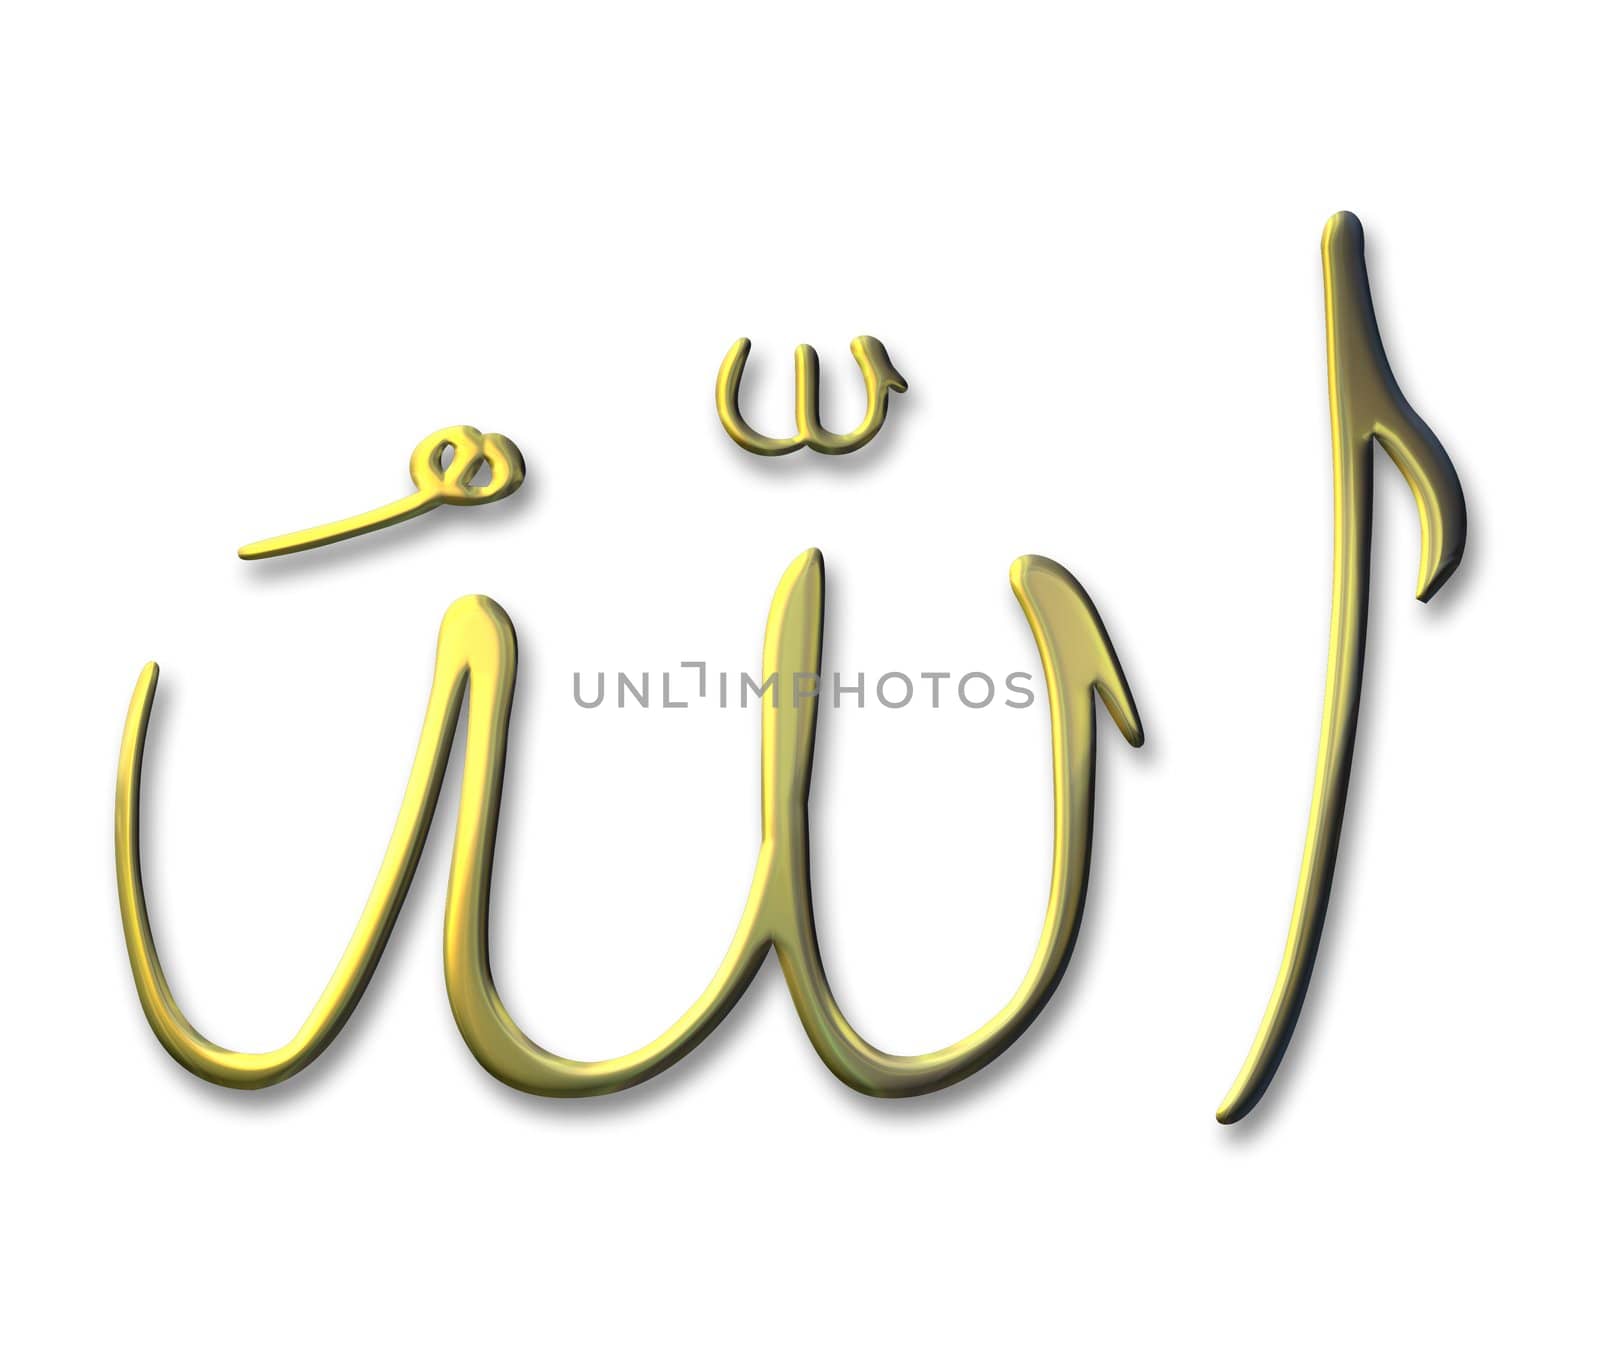 the name of Allah in Arabic calligraphy